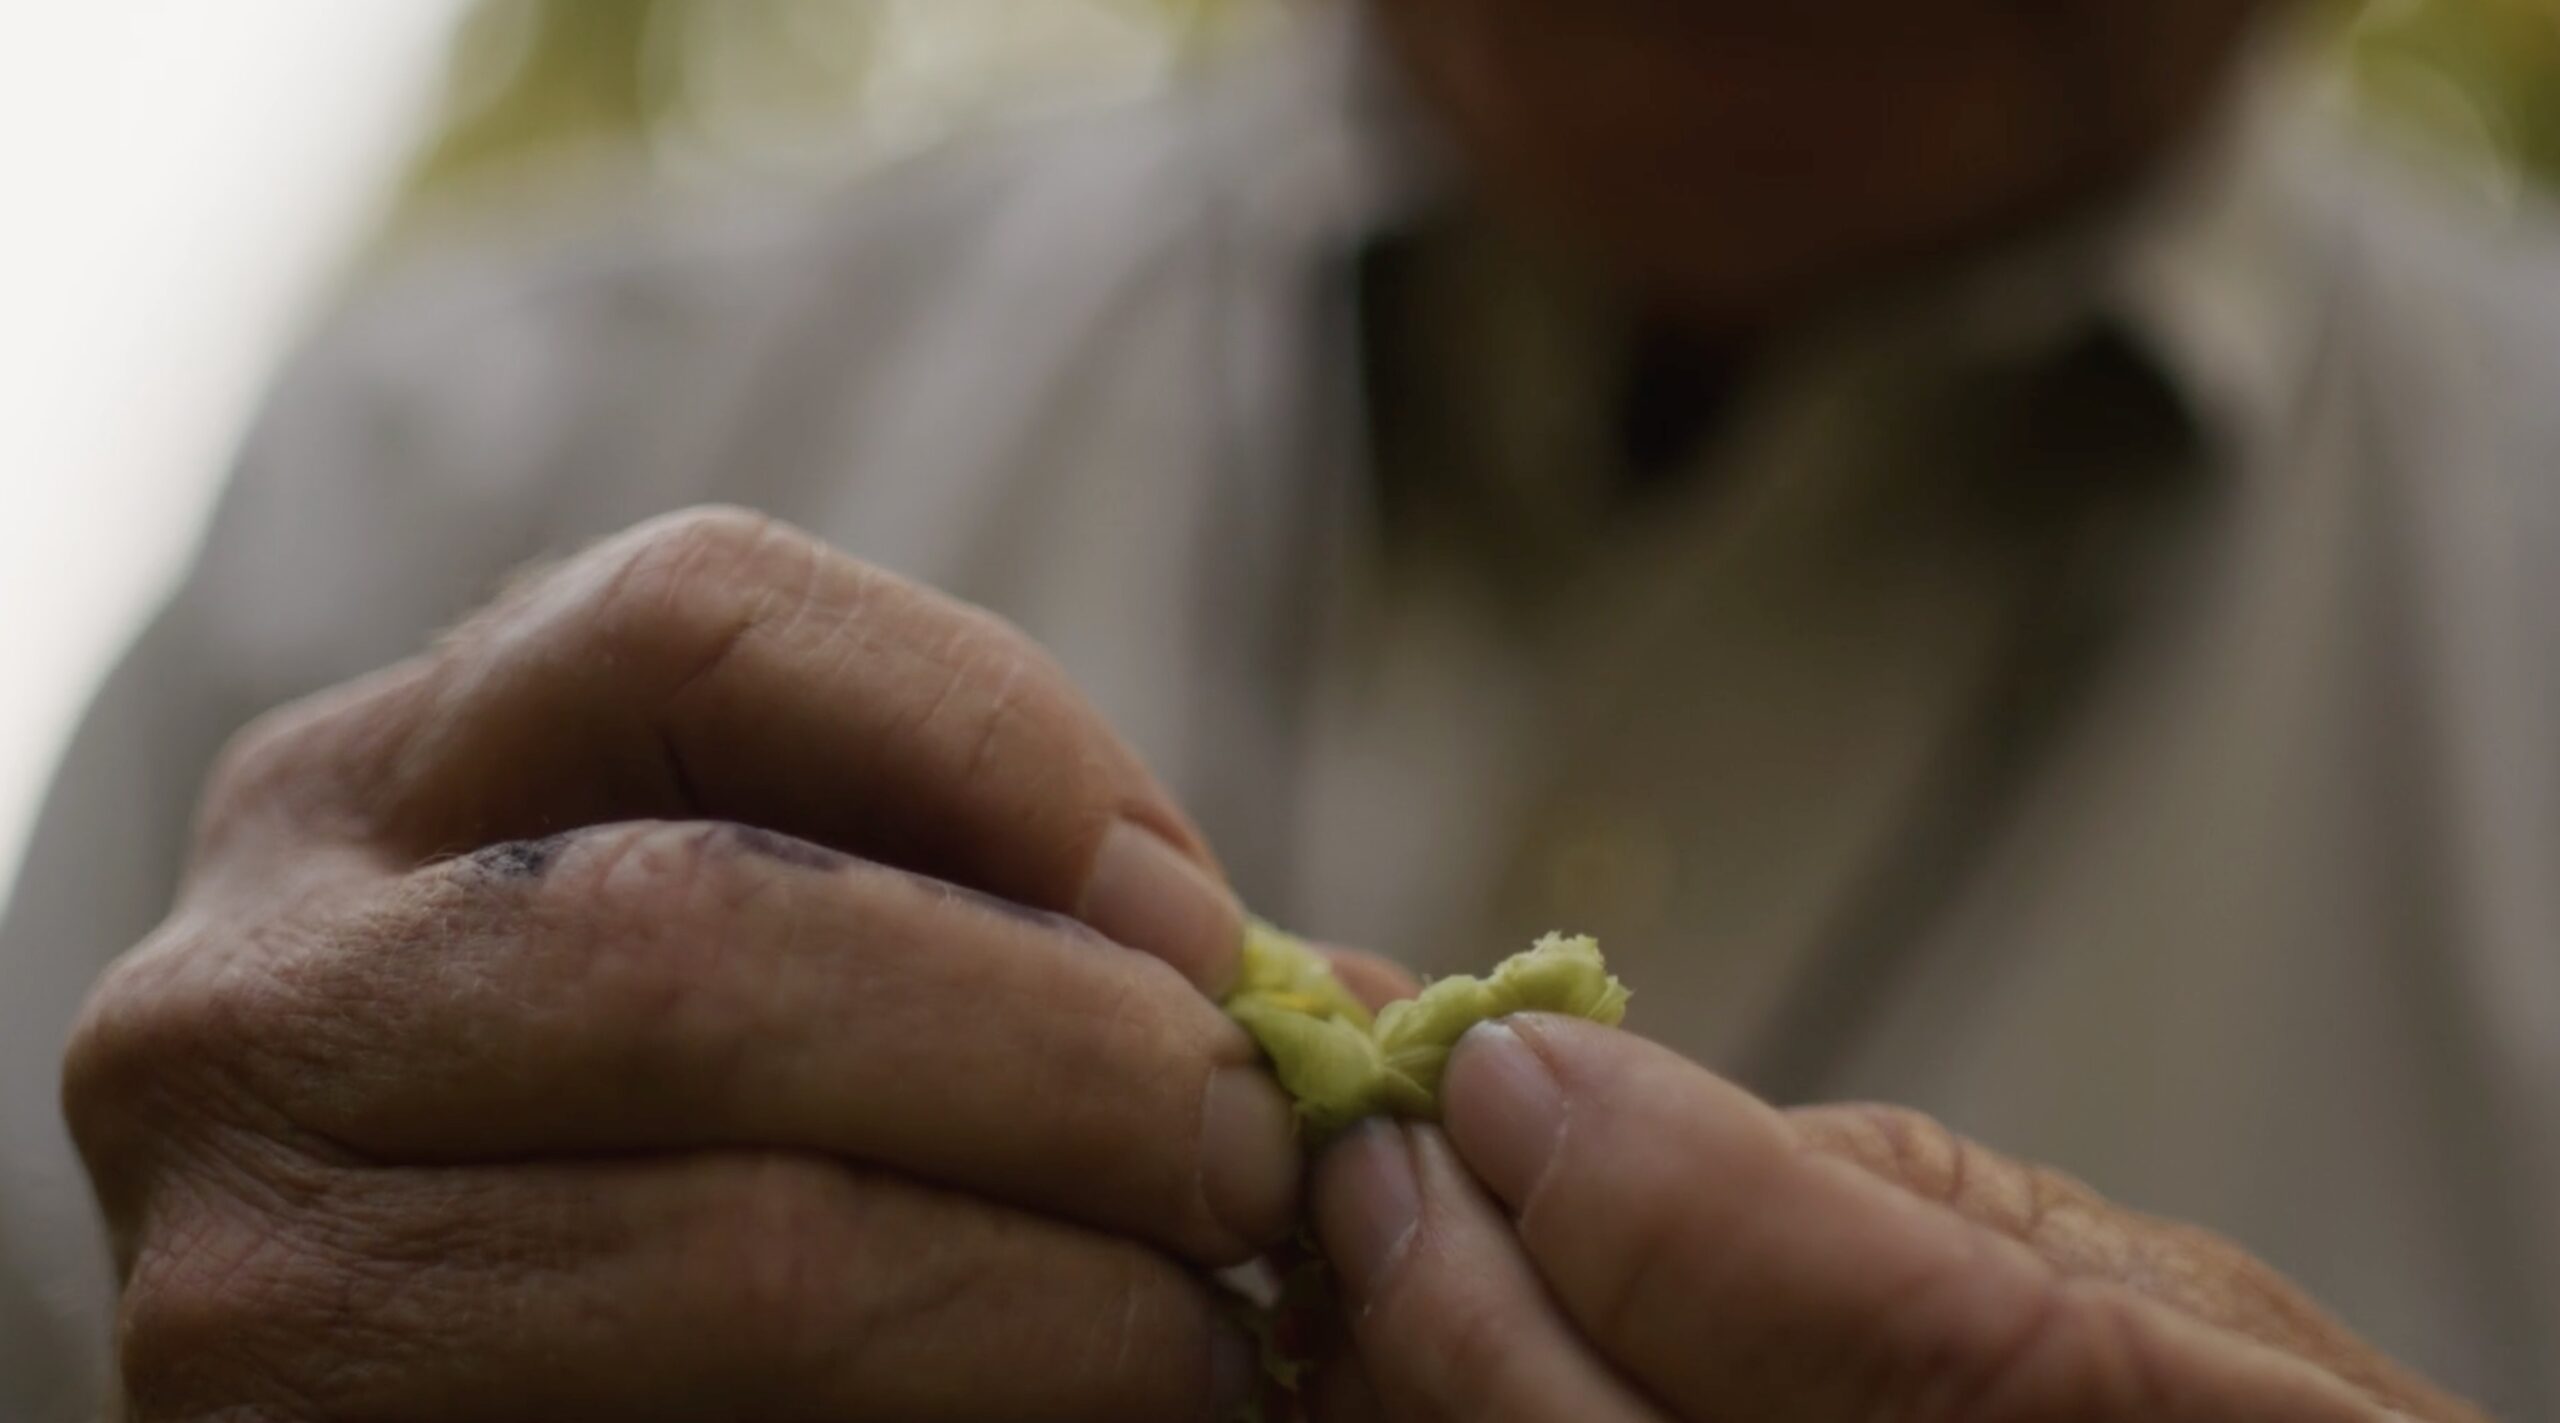 Farmer inspecting hops in Fremont Brewing video